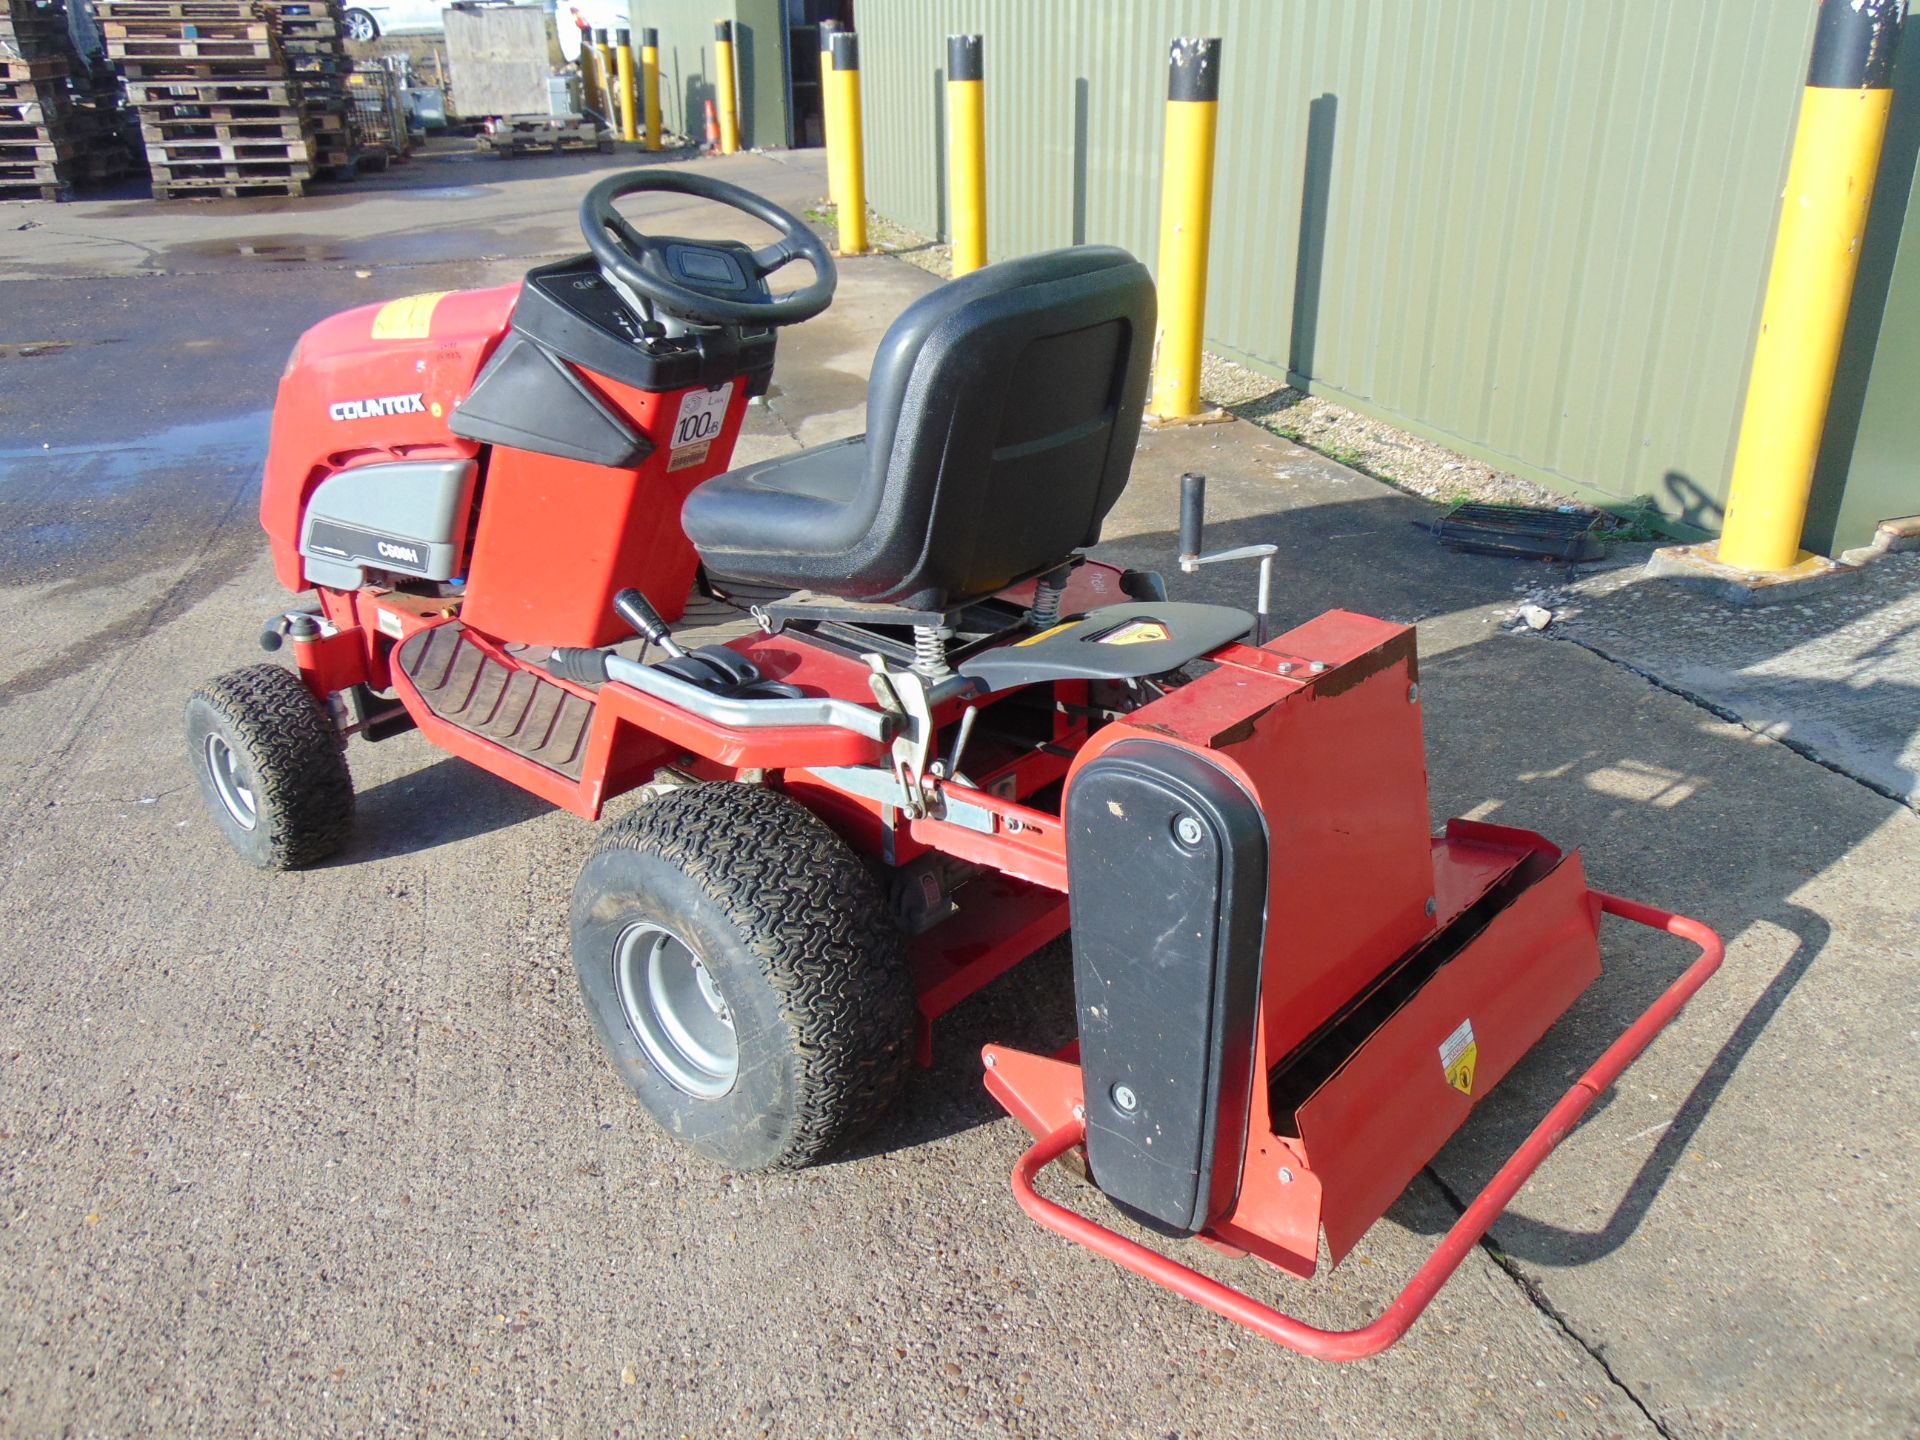 Countax C600H Ride On Garden Tractor c/w AM002 Powered Scarifier - Image 6 of 16